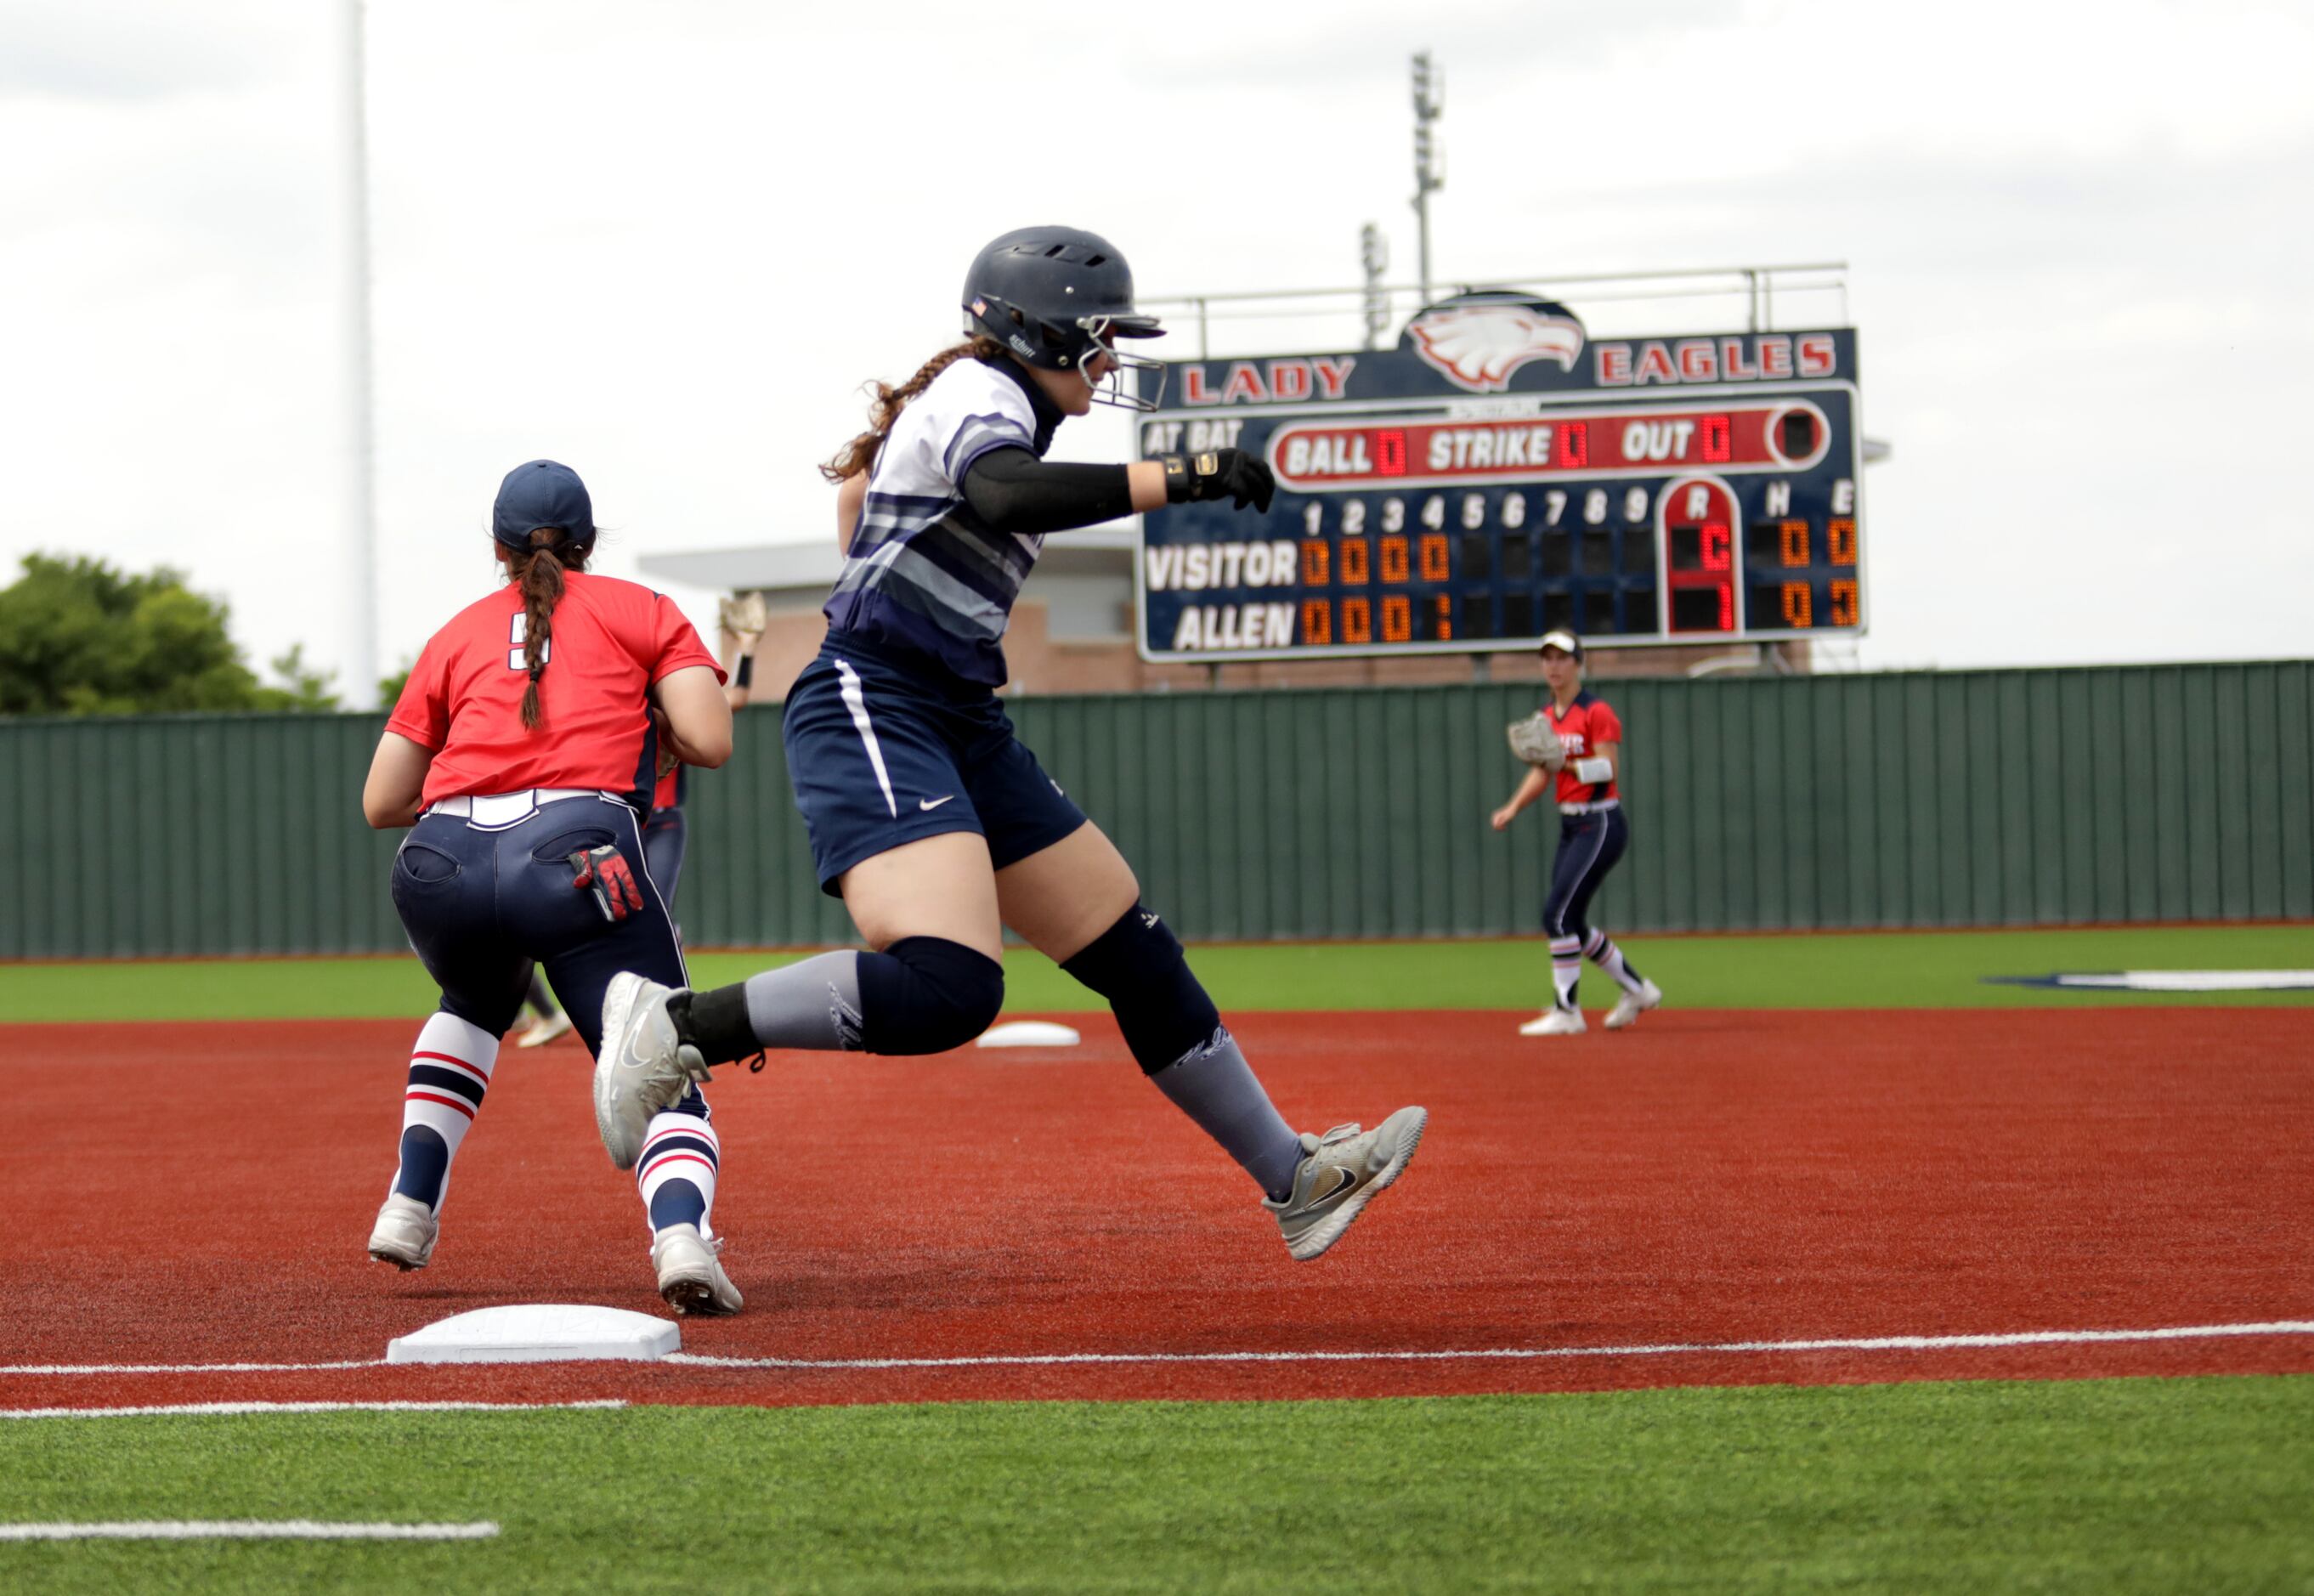 Flower Mound High School player #20, Katie Cantrell, runs past first base during a softball...